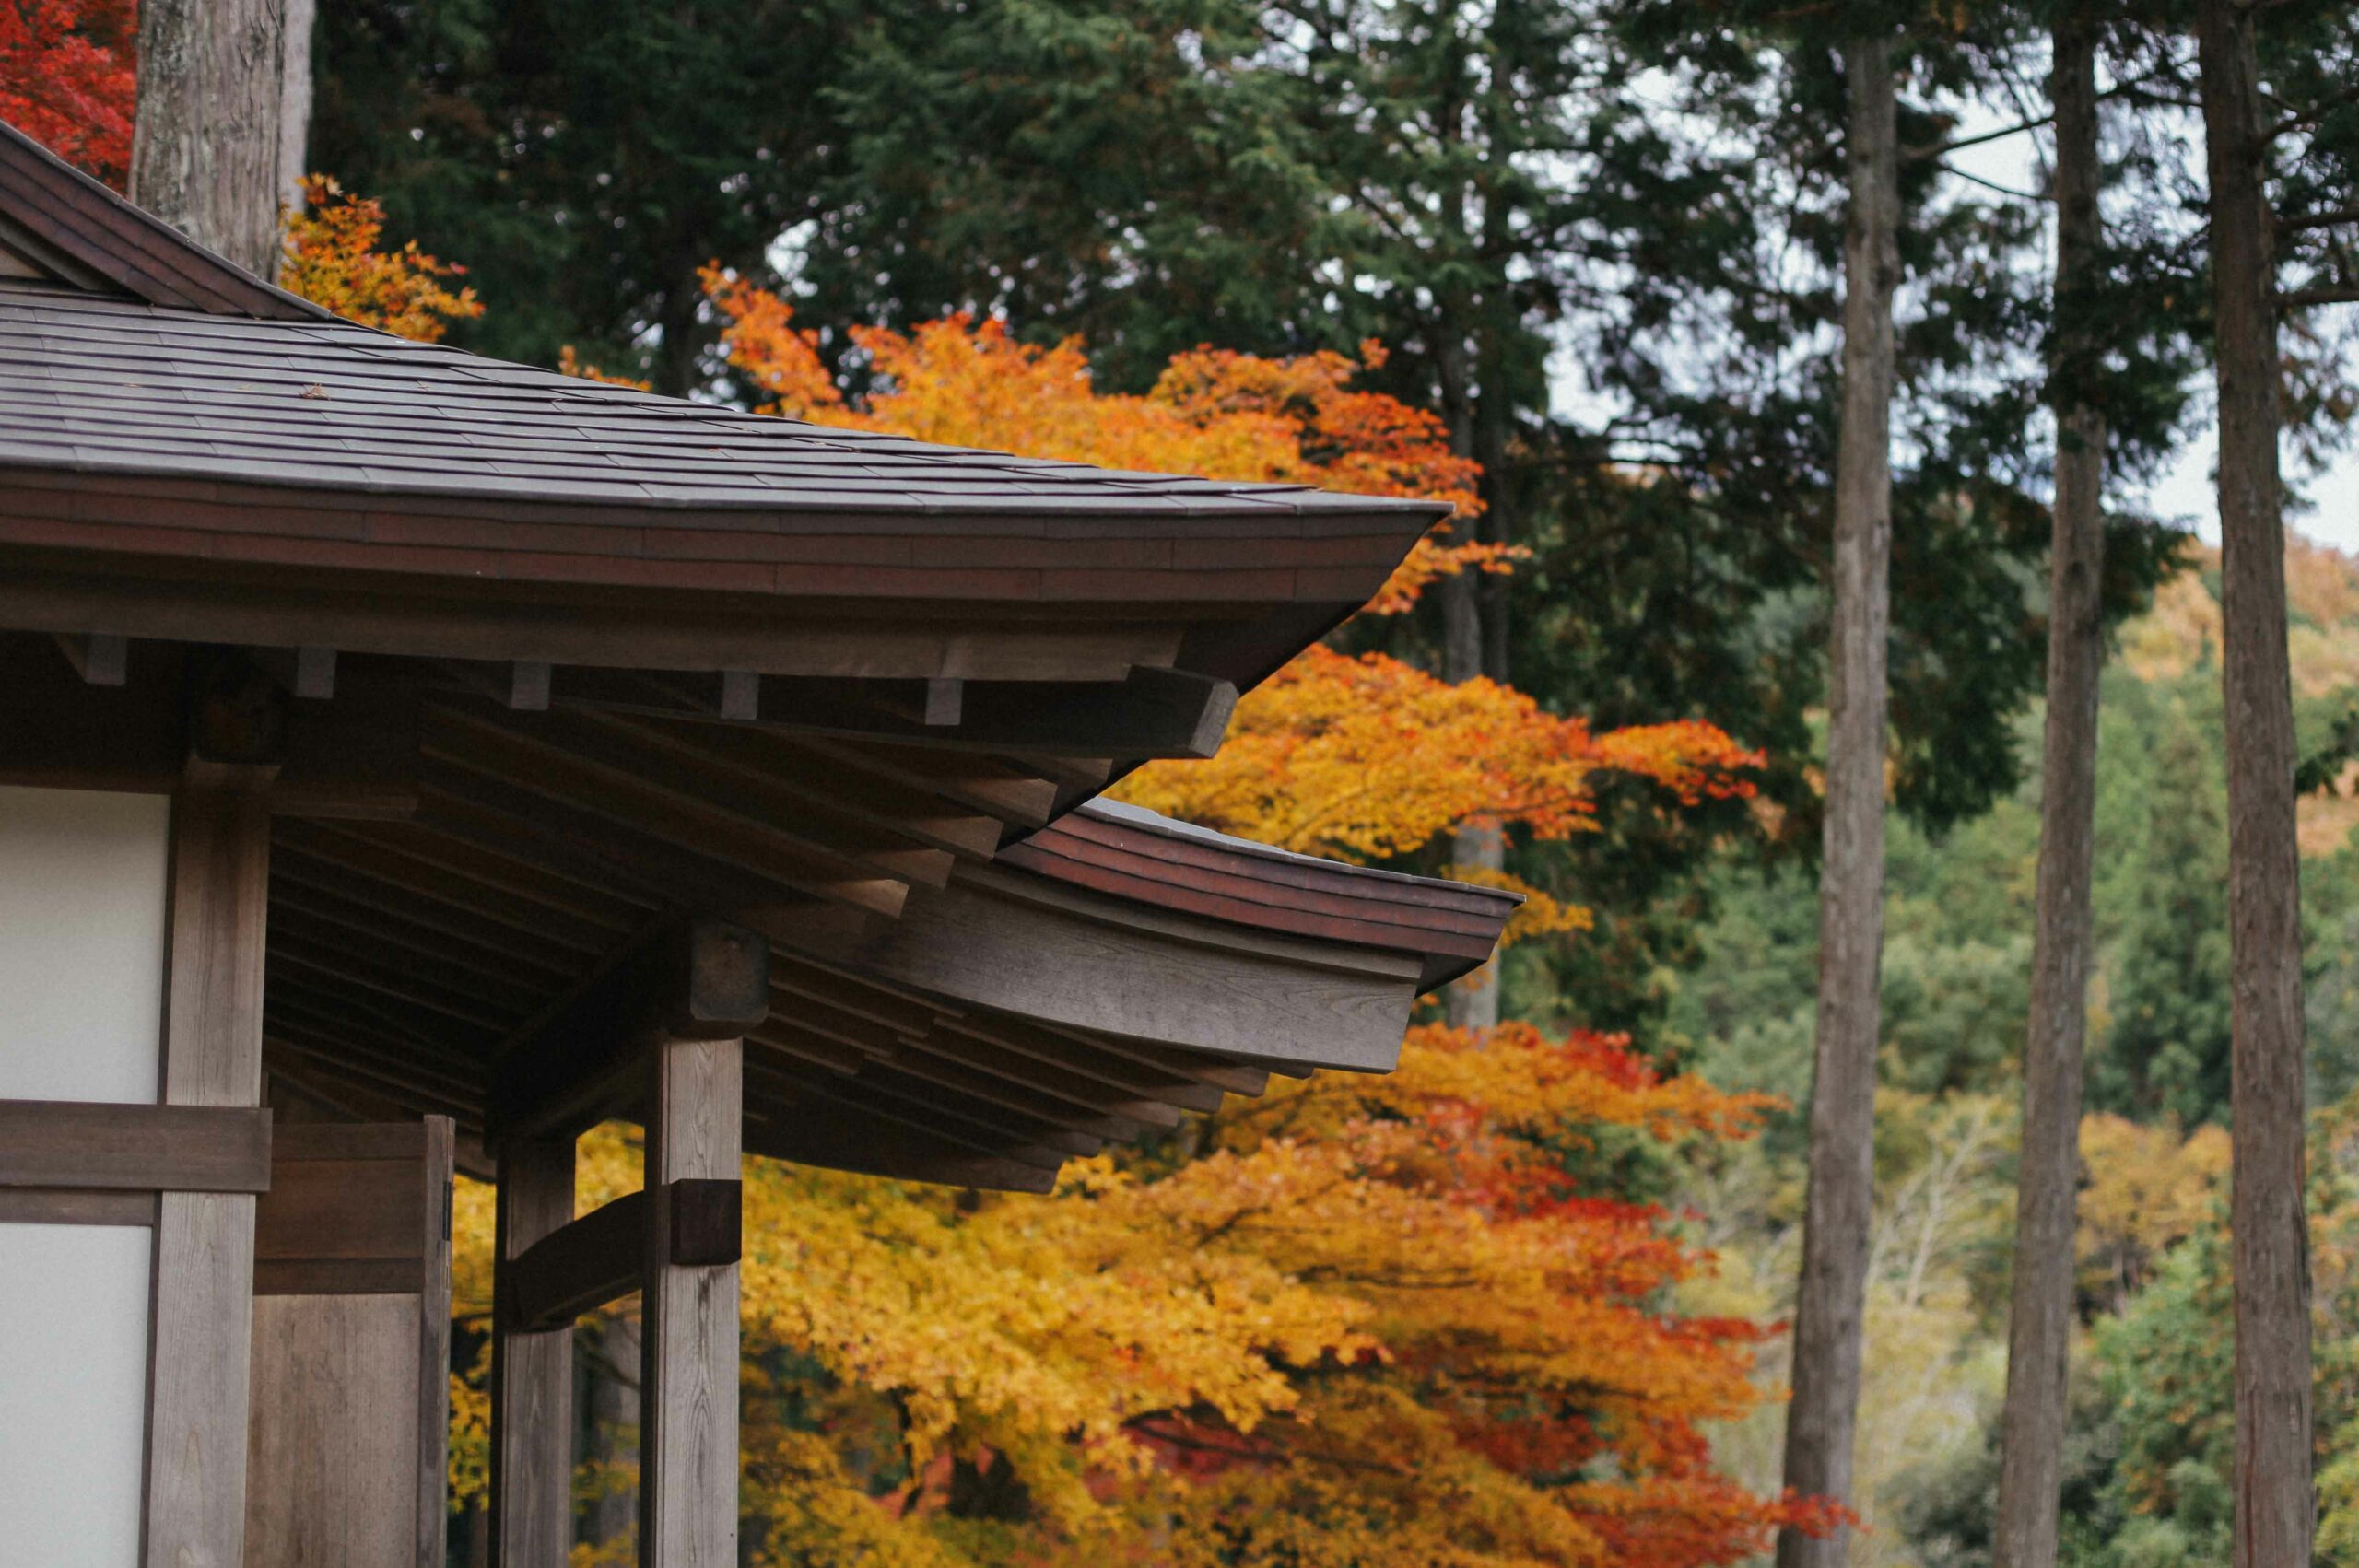 The autumn colours in the temple's forests stand in stark contrast to the dark hues of the temple buildings.